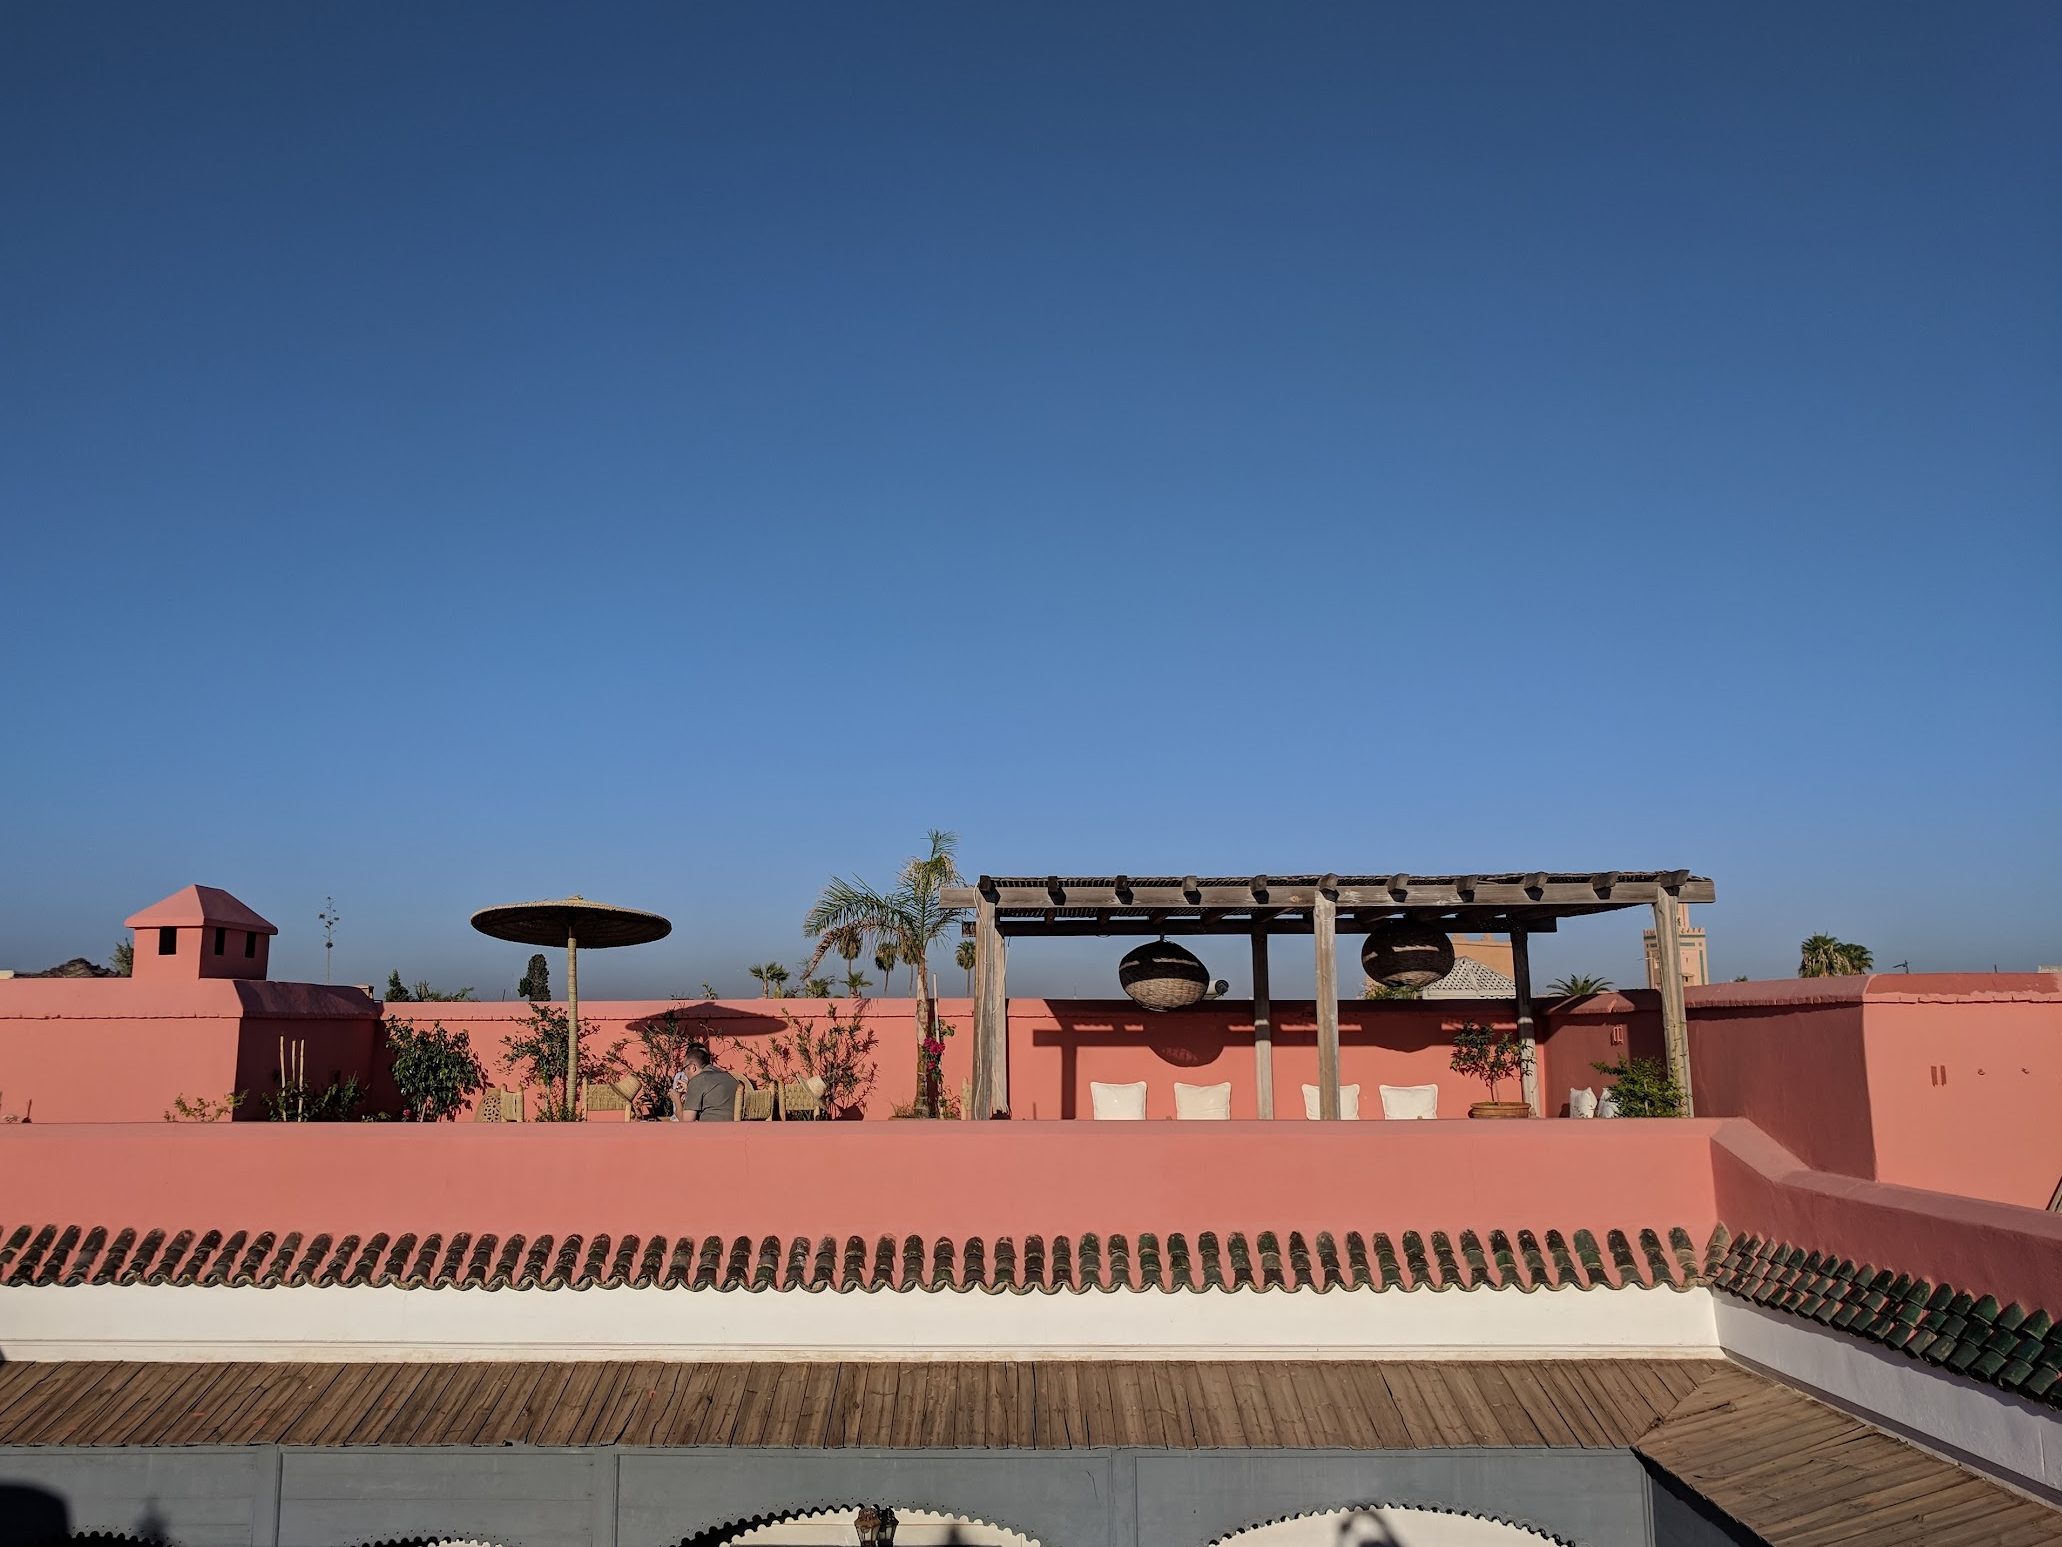 Sky view from a rooftop of a riad in Marrakech